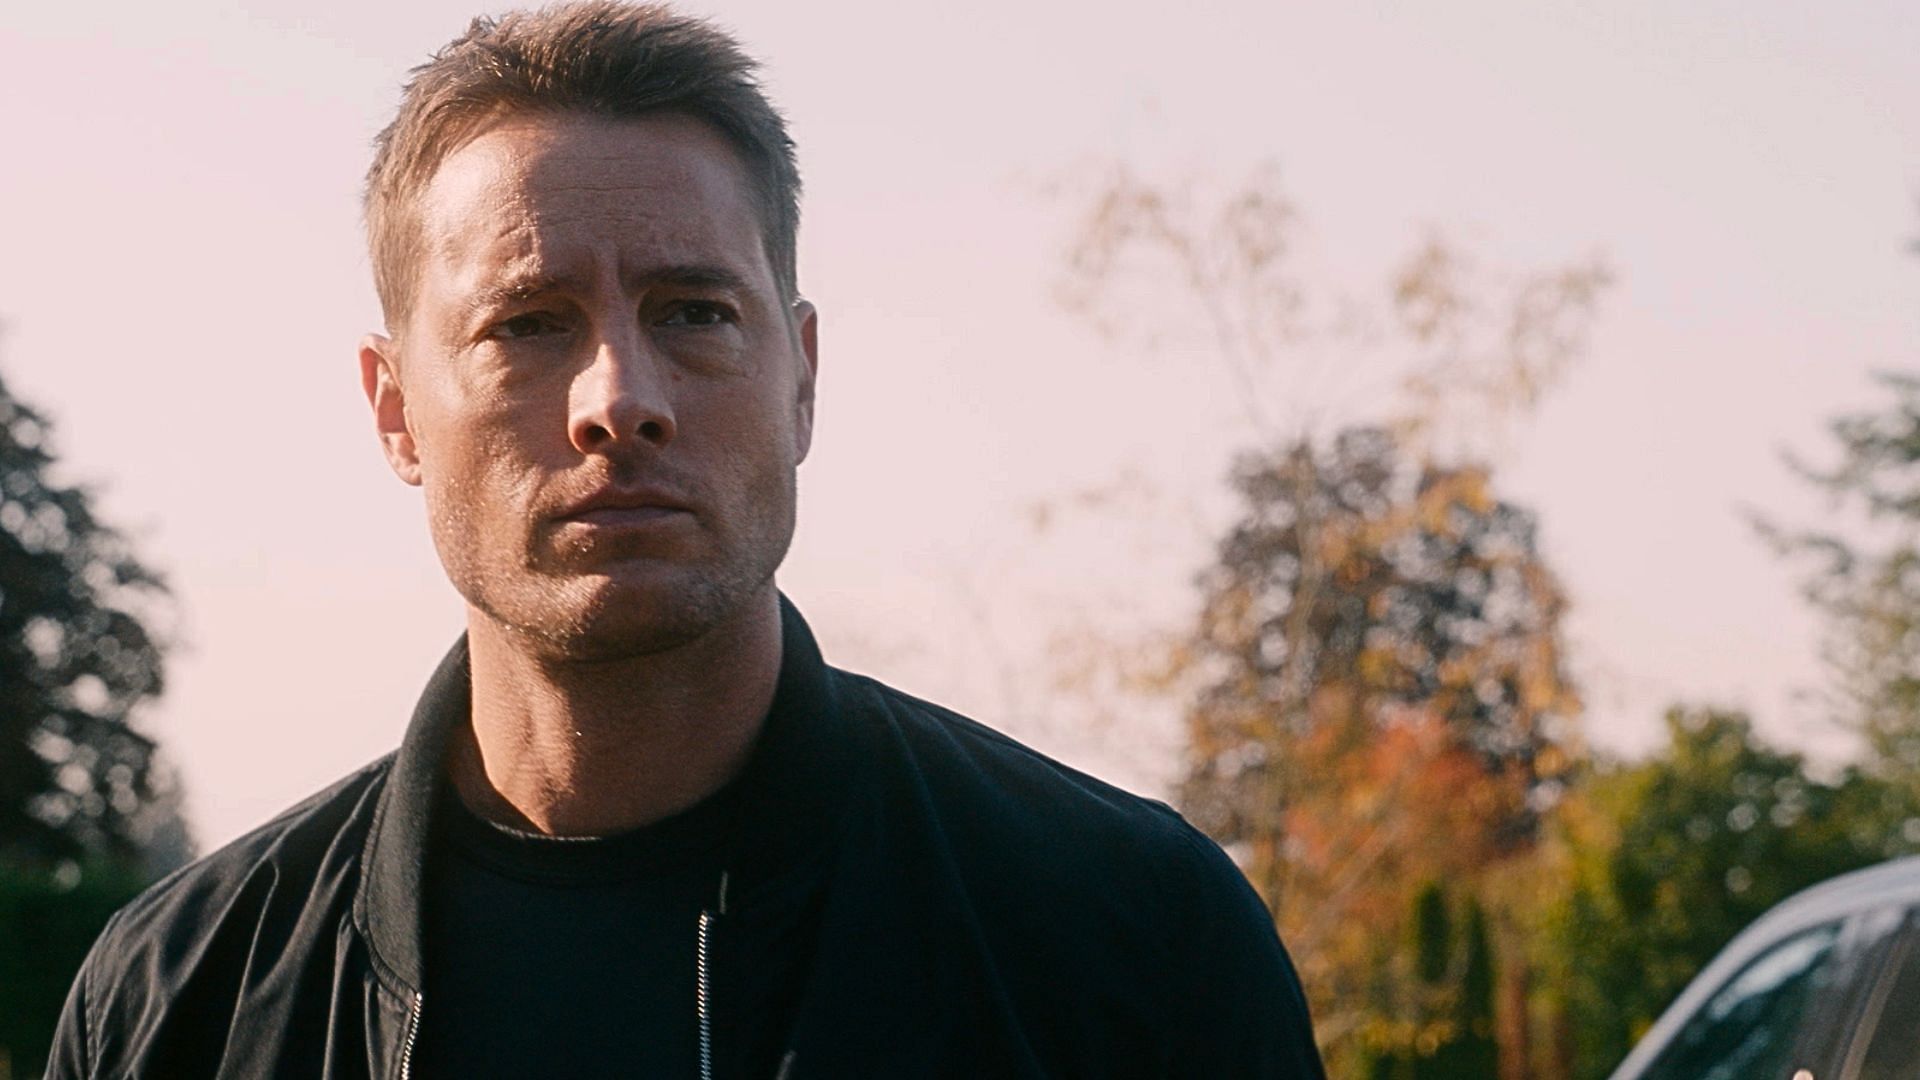 Justin Hartley in a still from the show (Images via CBS, teaser thumbnail)